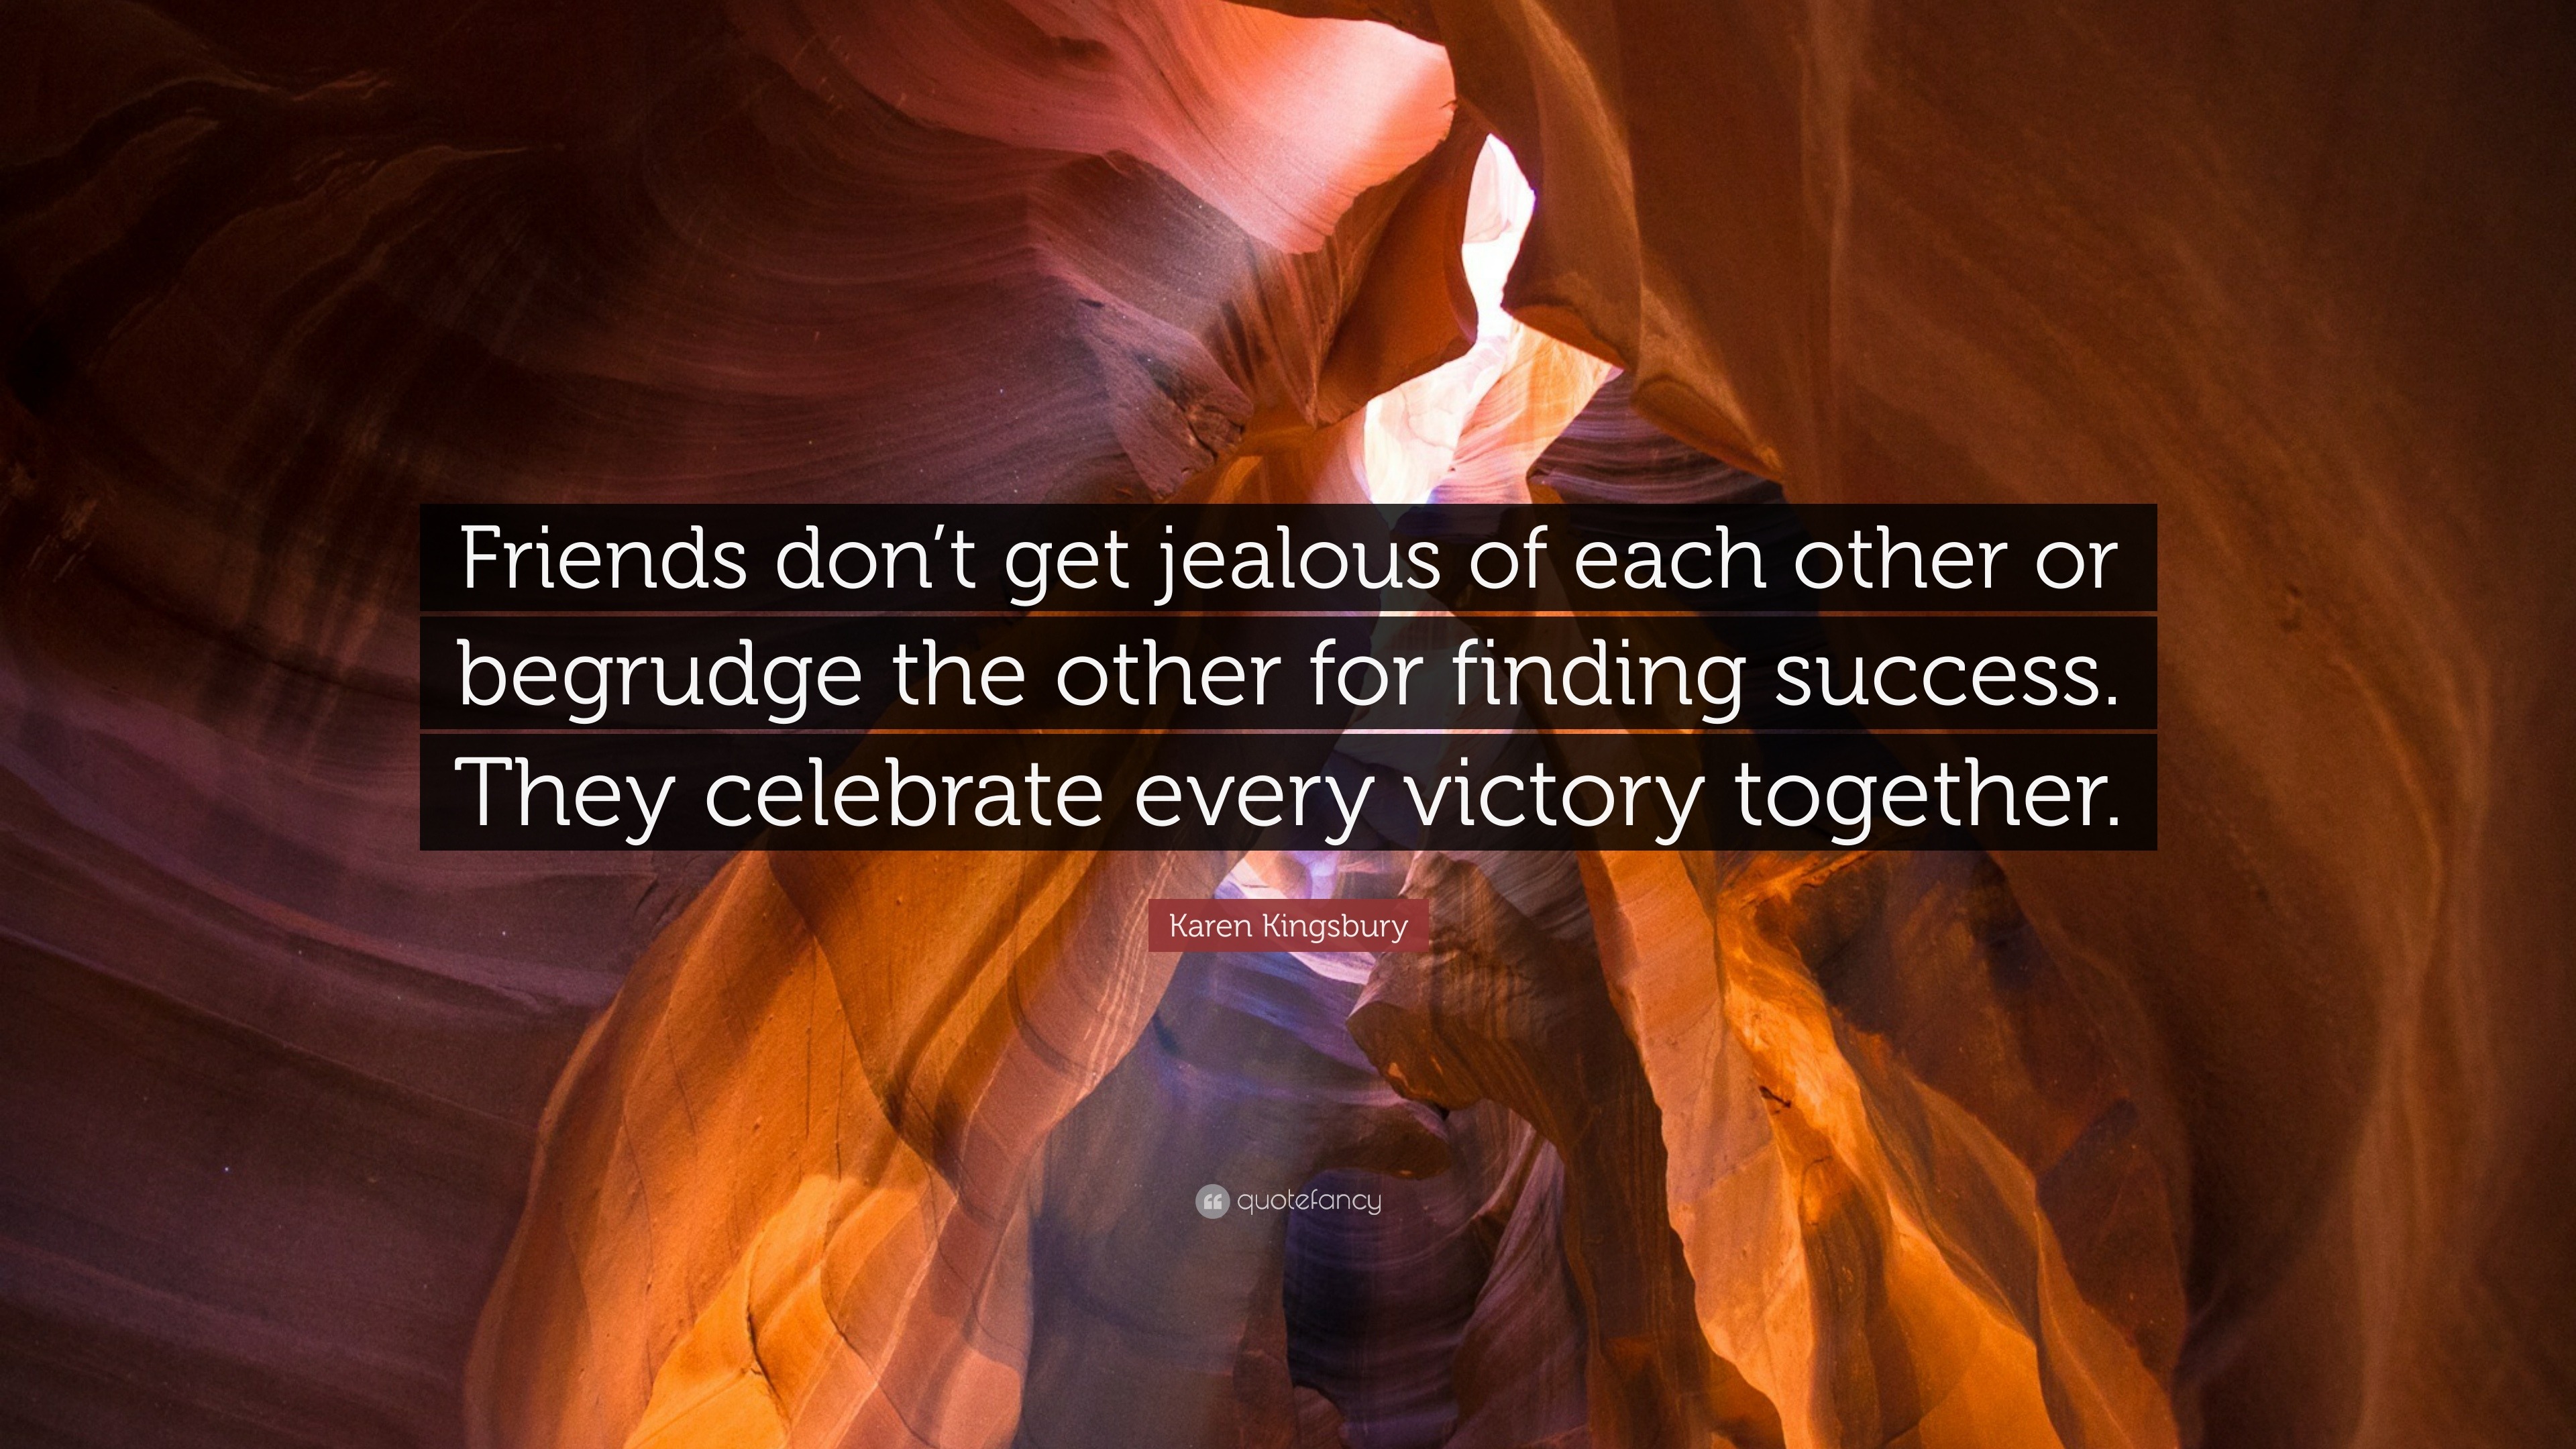 Karen Kingsbury Quote Friends Don T Get Jealous Of Each Other Or Begrudge The Other For Finding Success They Celebrate Every Victory Together